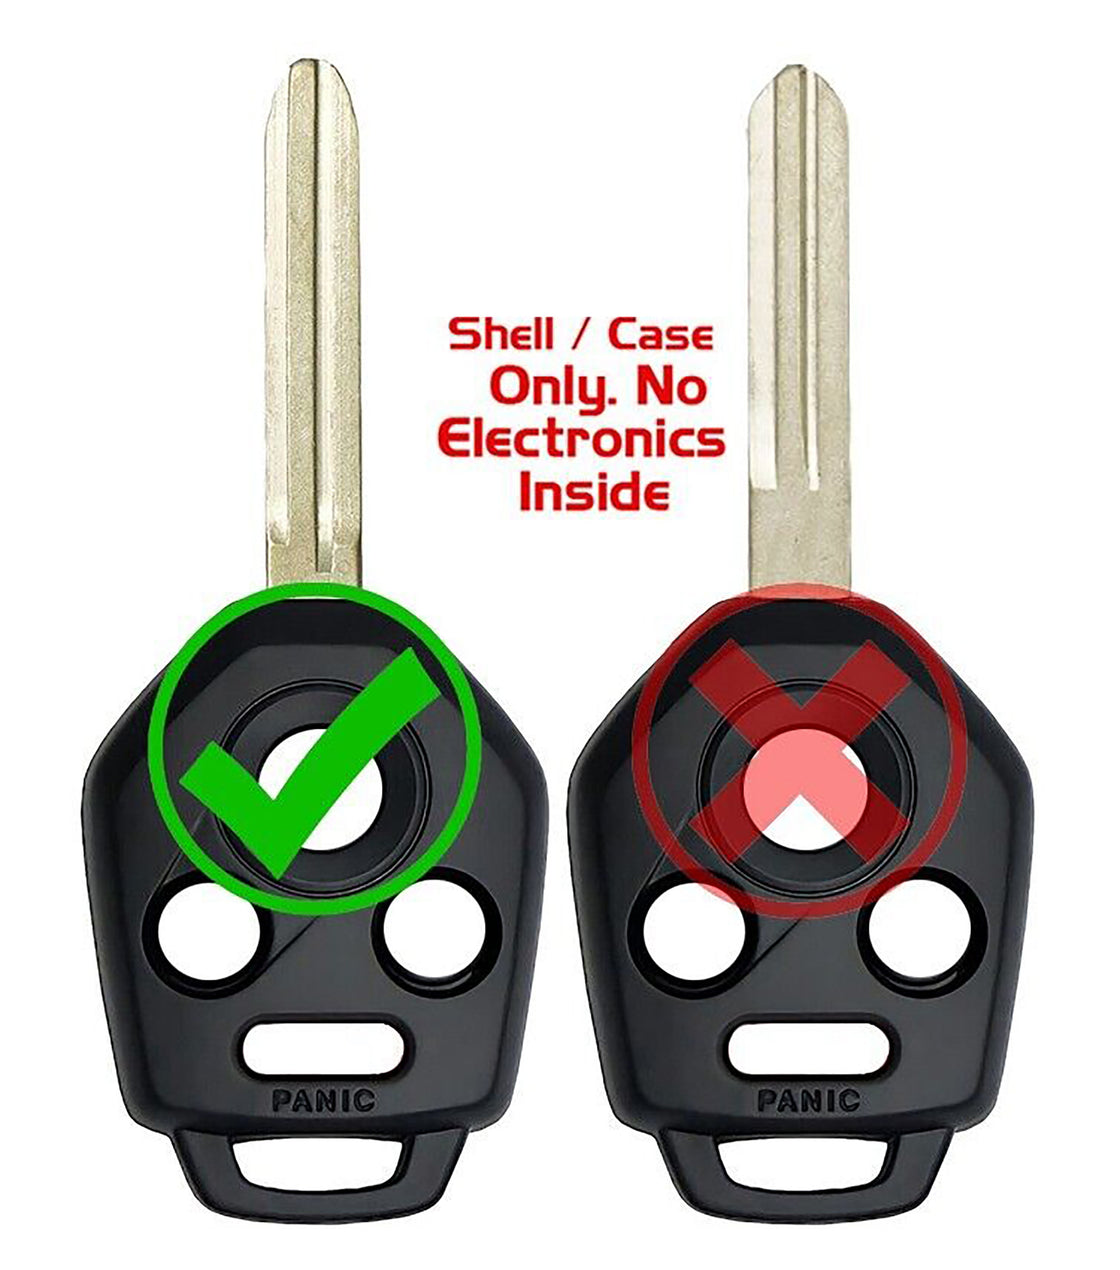 1x New Replacement Key Fob Remote SHELL / CASE Compatible with & Fit For Subaru Vehicles - MPN CWTWB1U811-08 (NO electronics or Chip inside)